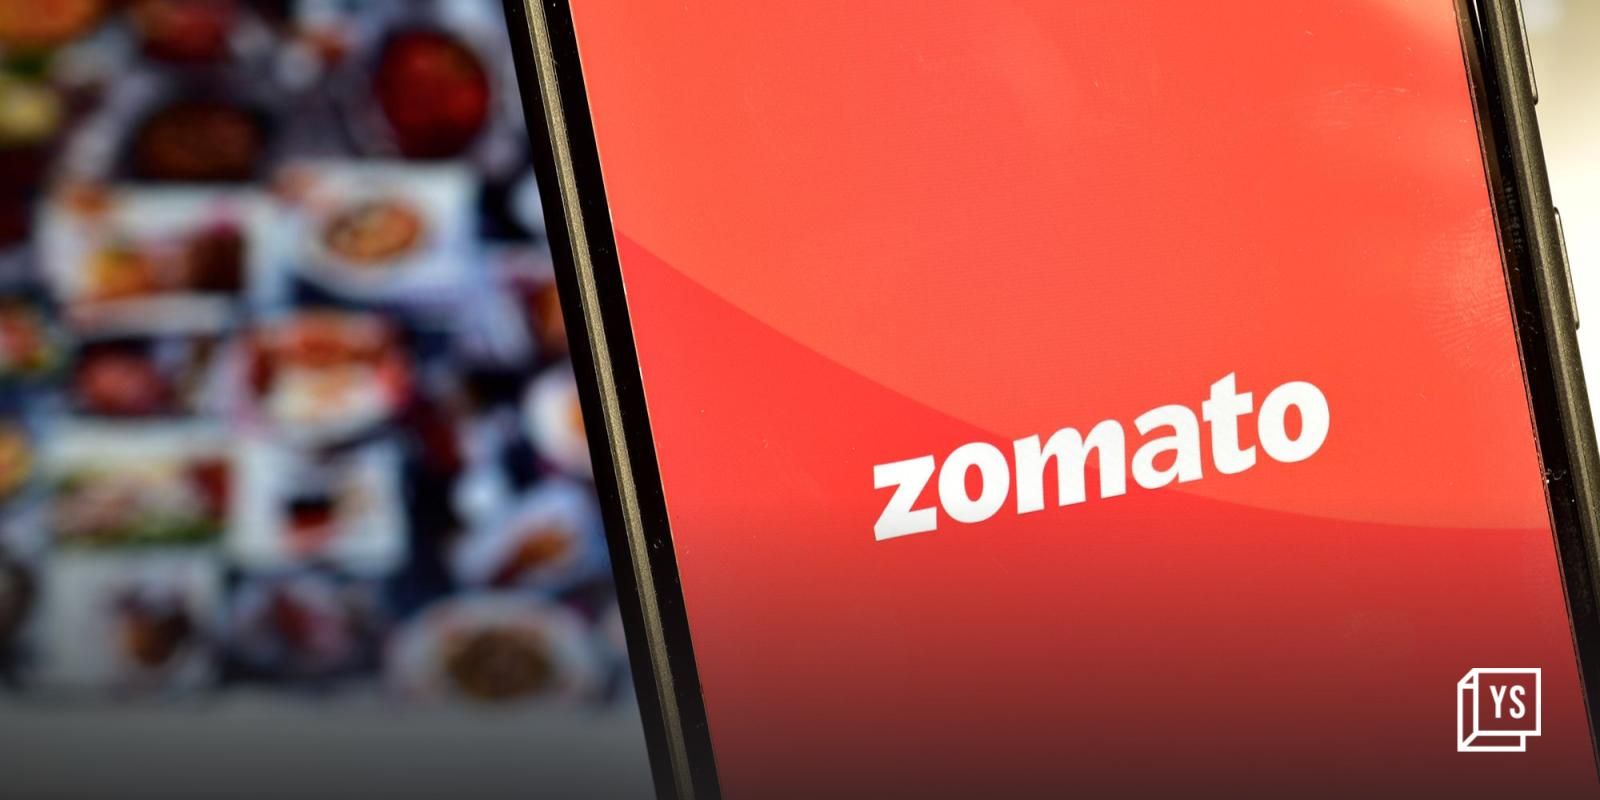 Zomato confirms Blinkit's Urban Company-like home service is in the works